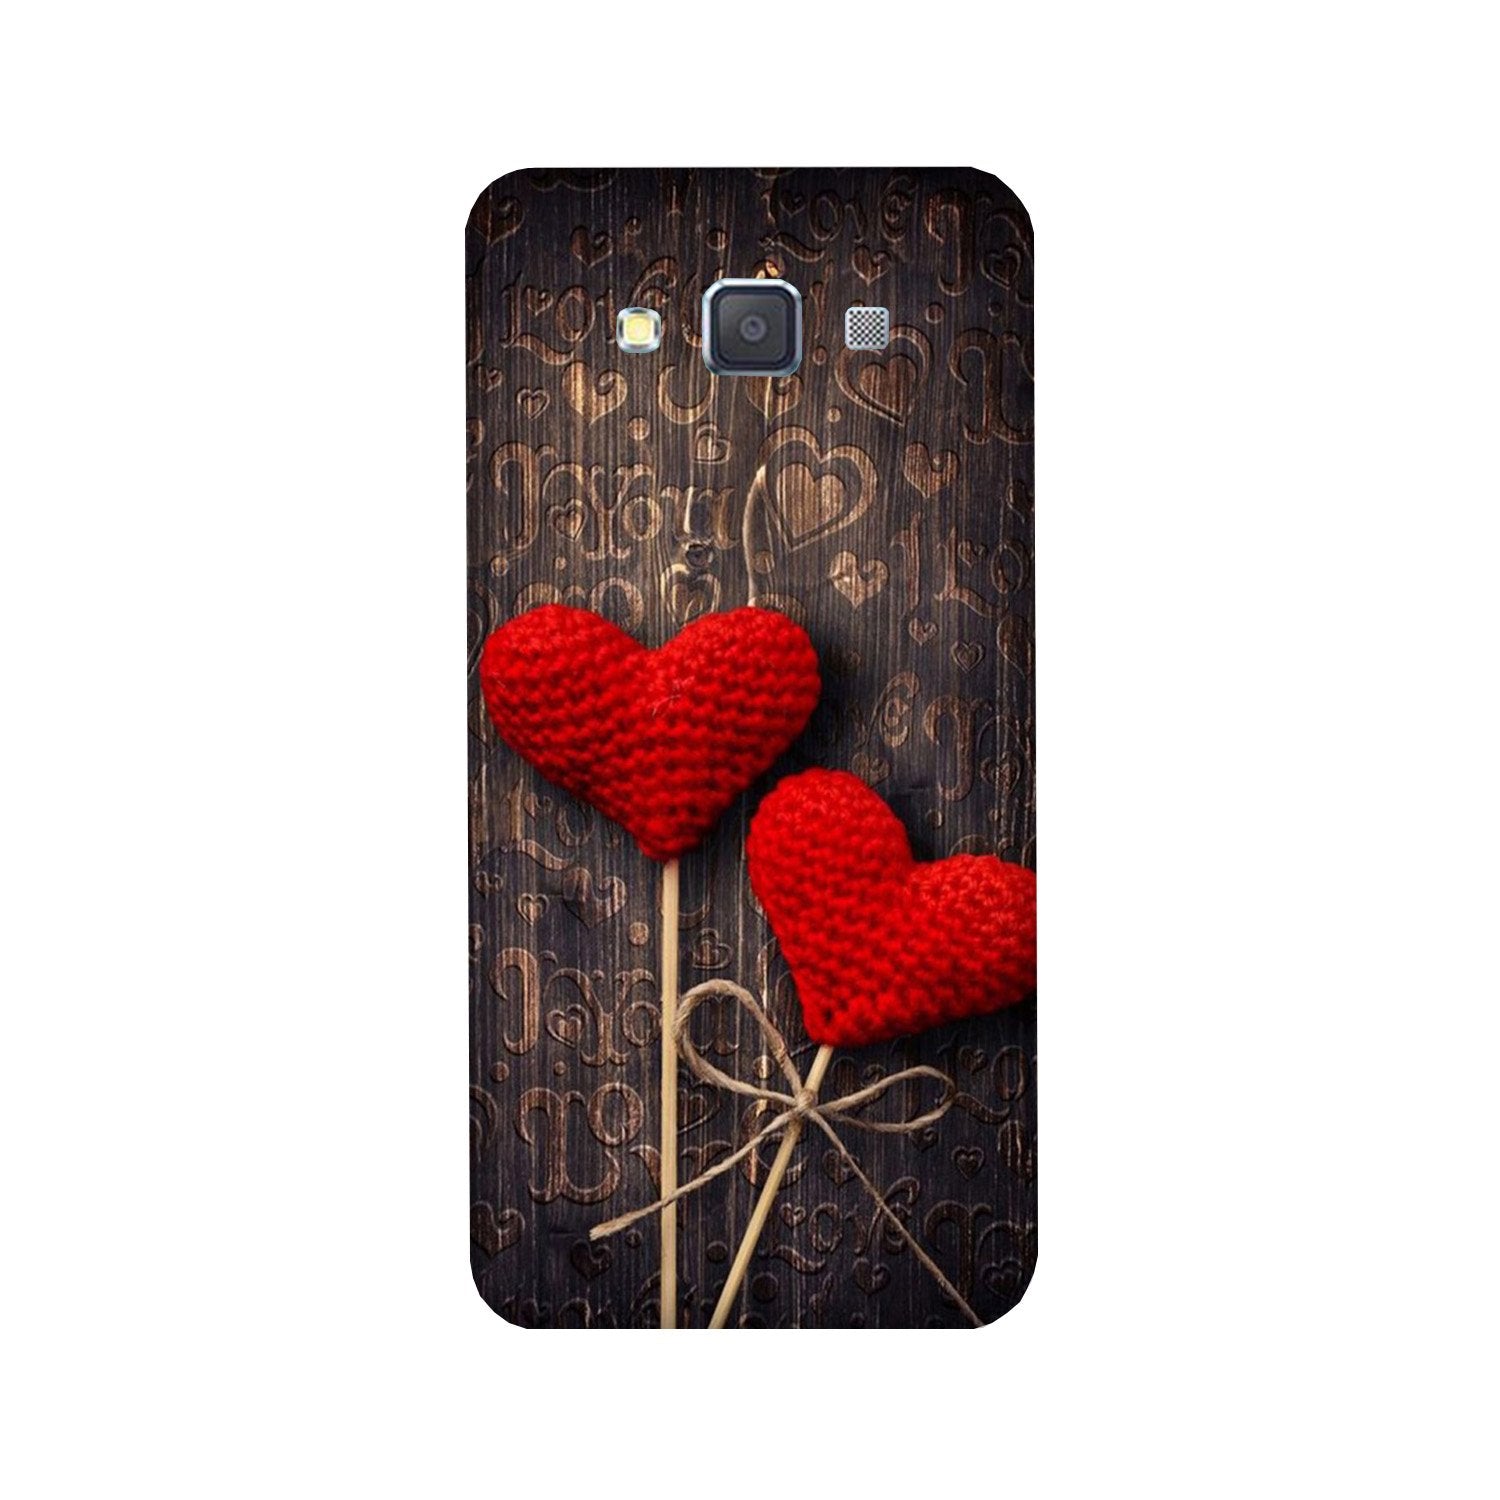 Red Hearts Case for Galaxy A5 (2015)